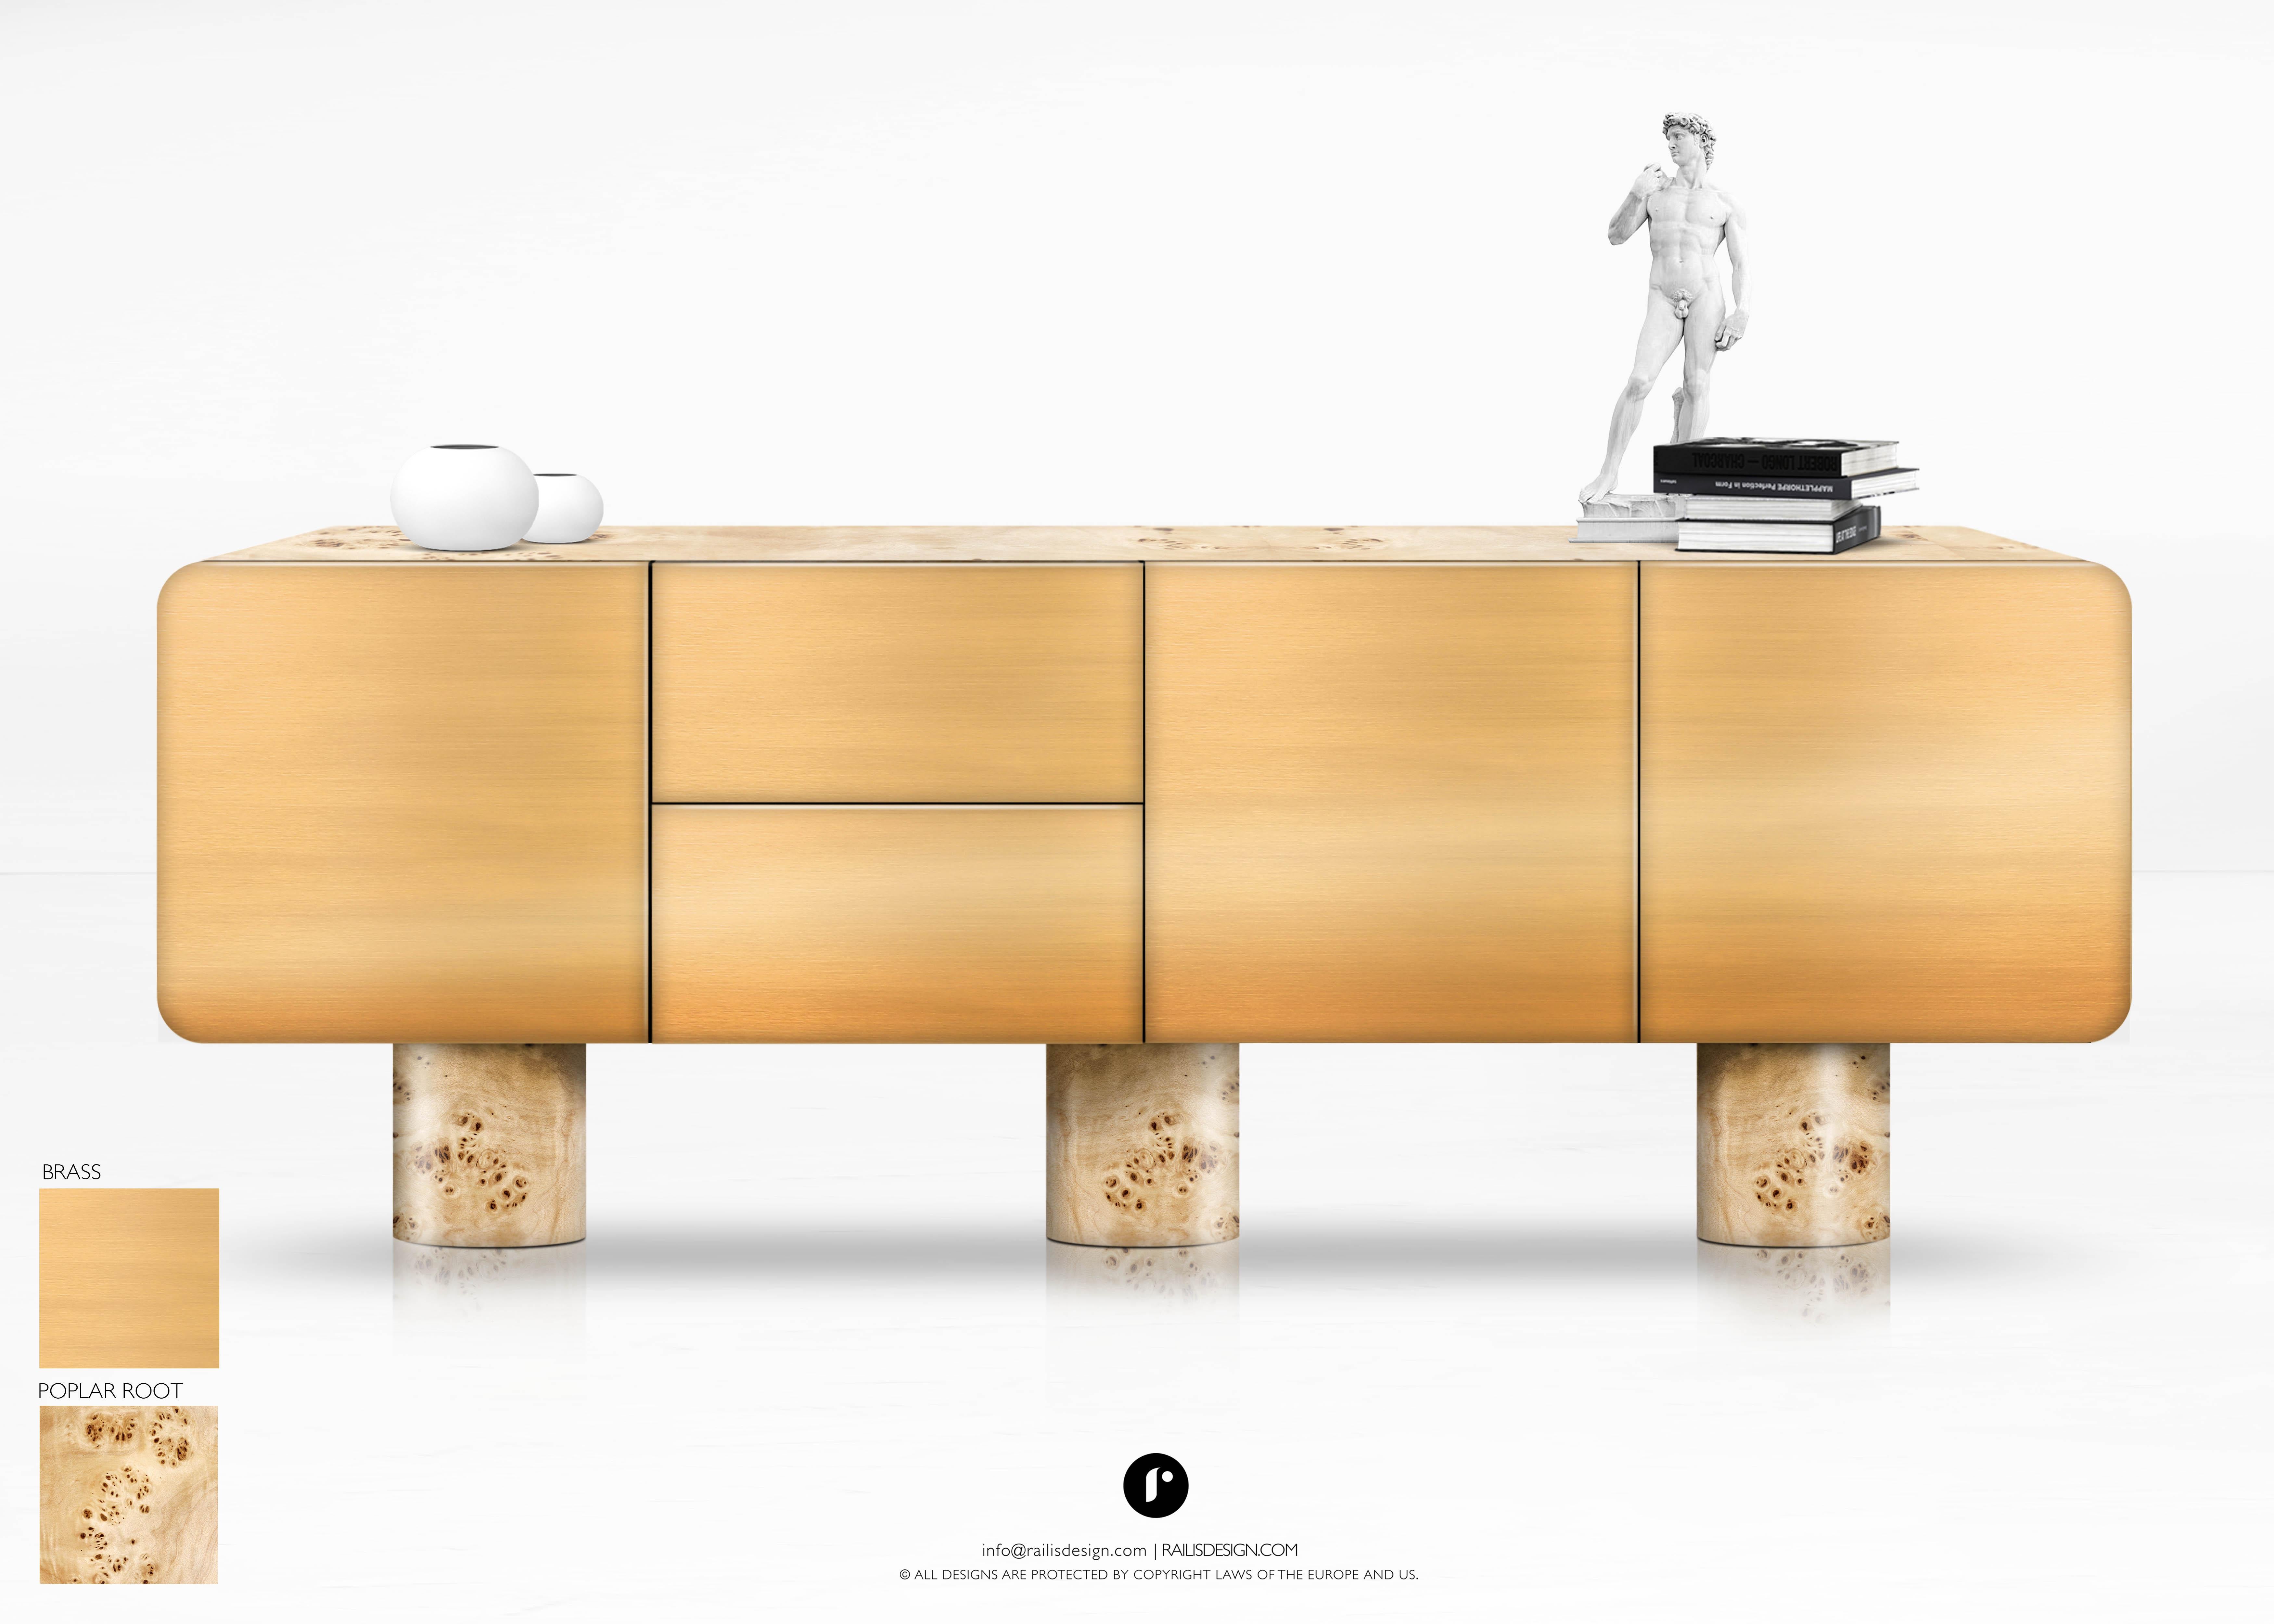 The brushed brass and poplar root Sideboard Freya. Combining style along with an excellent storage solution.

Part of our Freya collection. 

This design features poplar root veneer with contrasting brushed brass finish details.The sideboard has